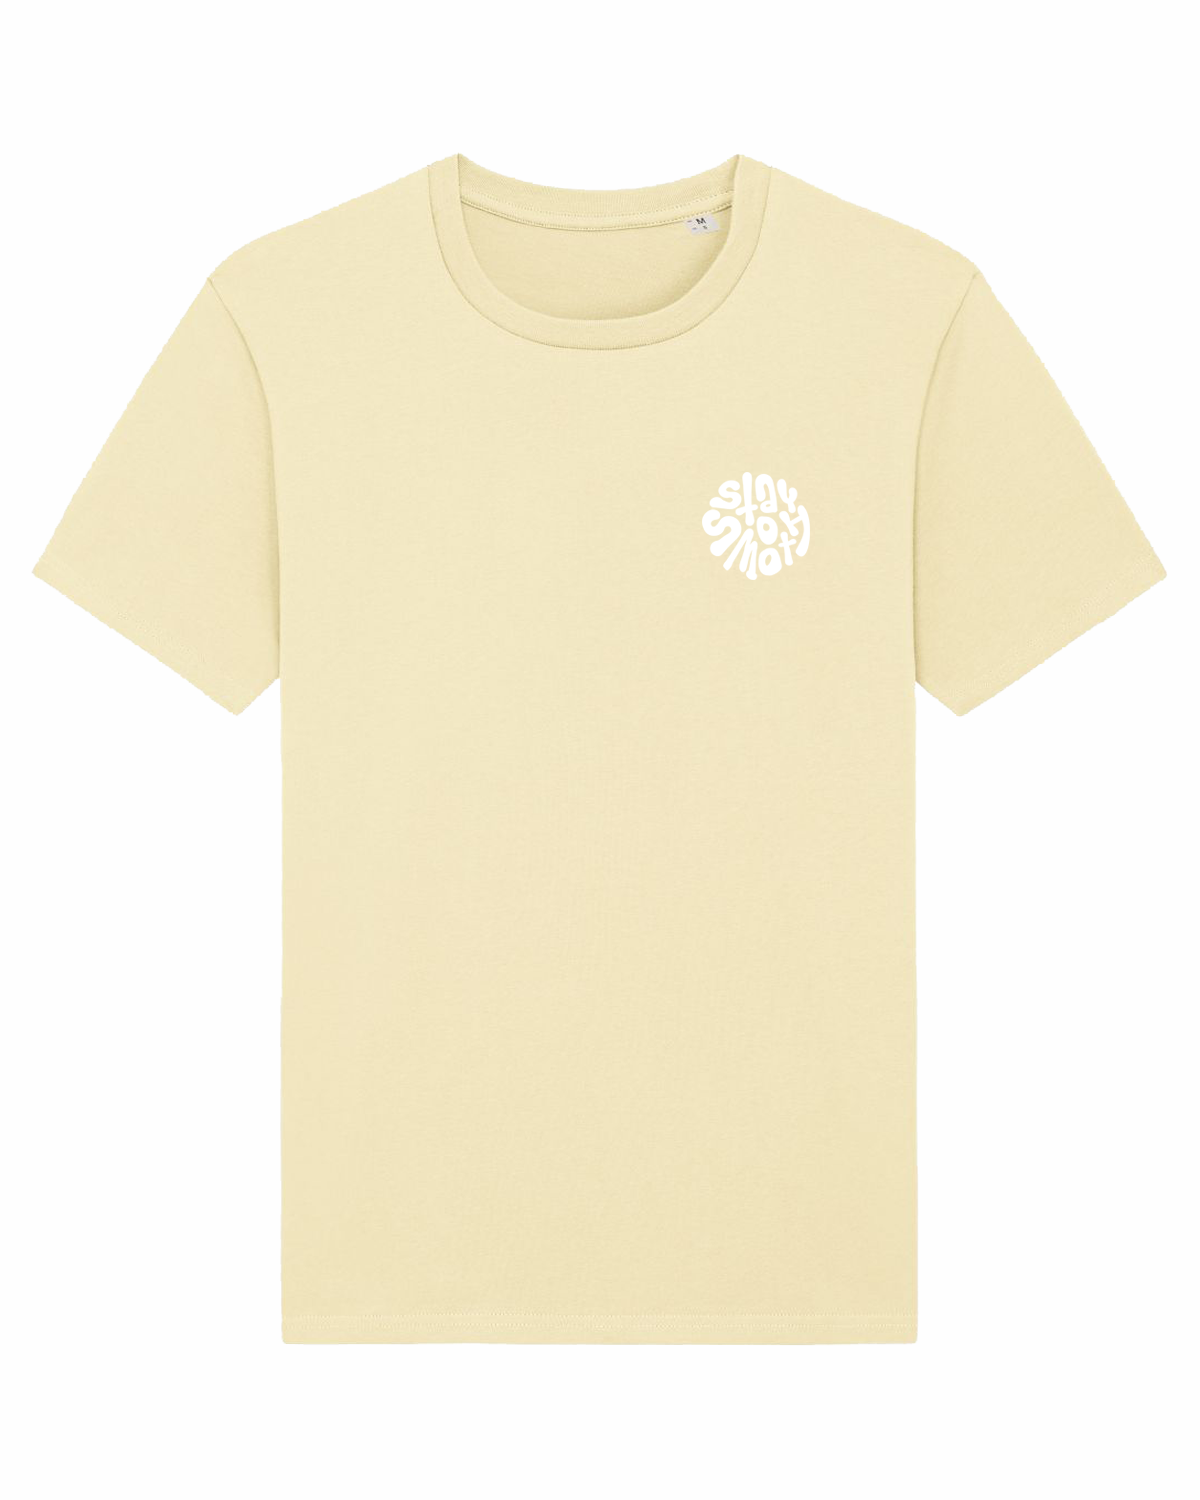 Soft Yellow T / Stay Smooth White Front Boys